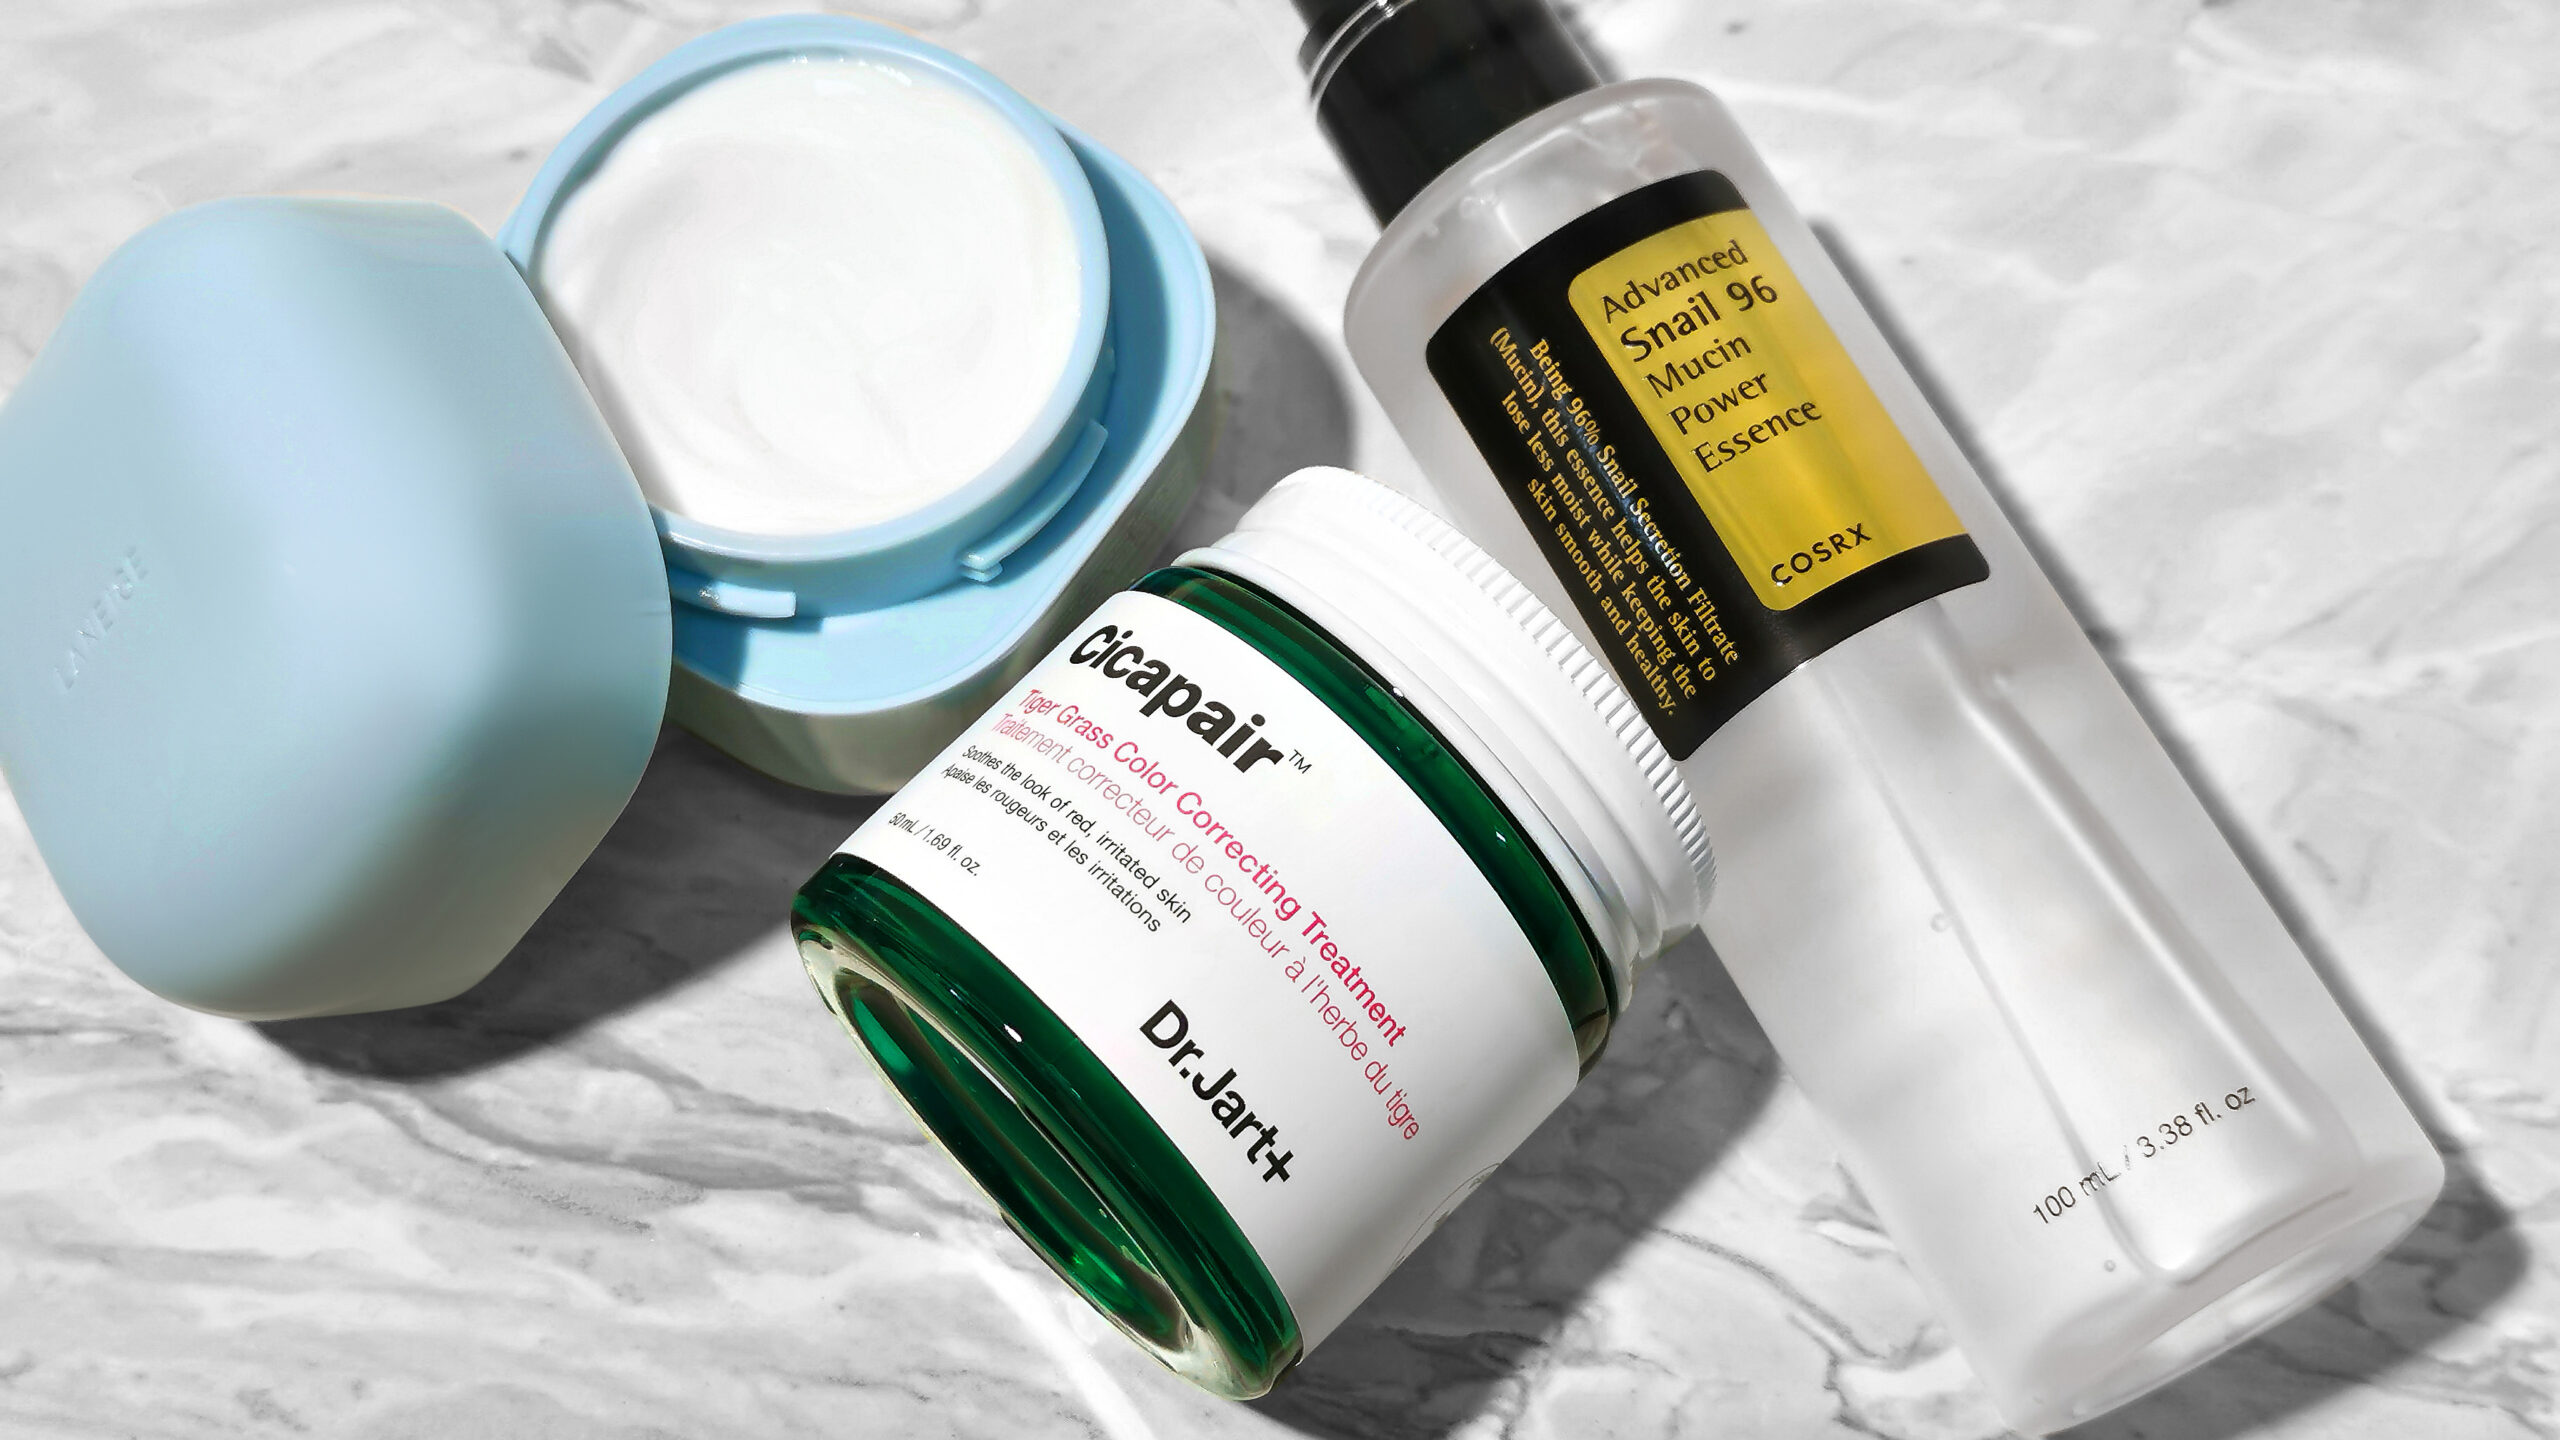 Learn About The Korean Skincare Brands